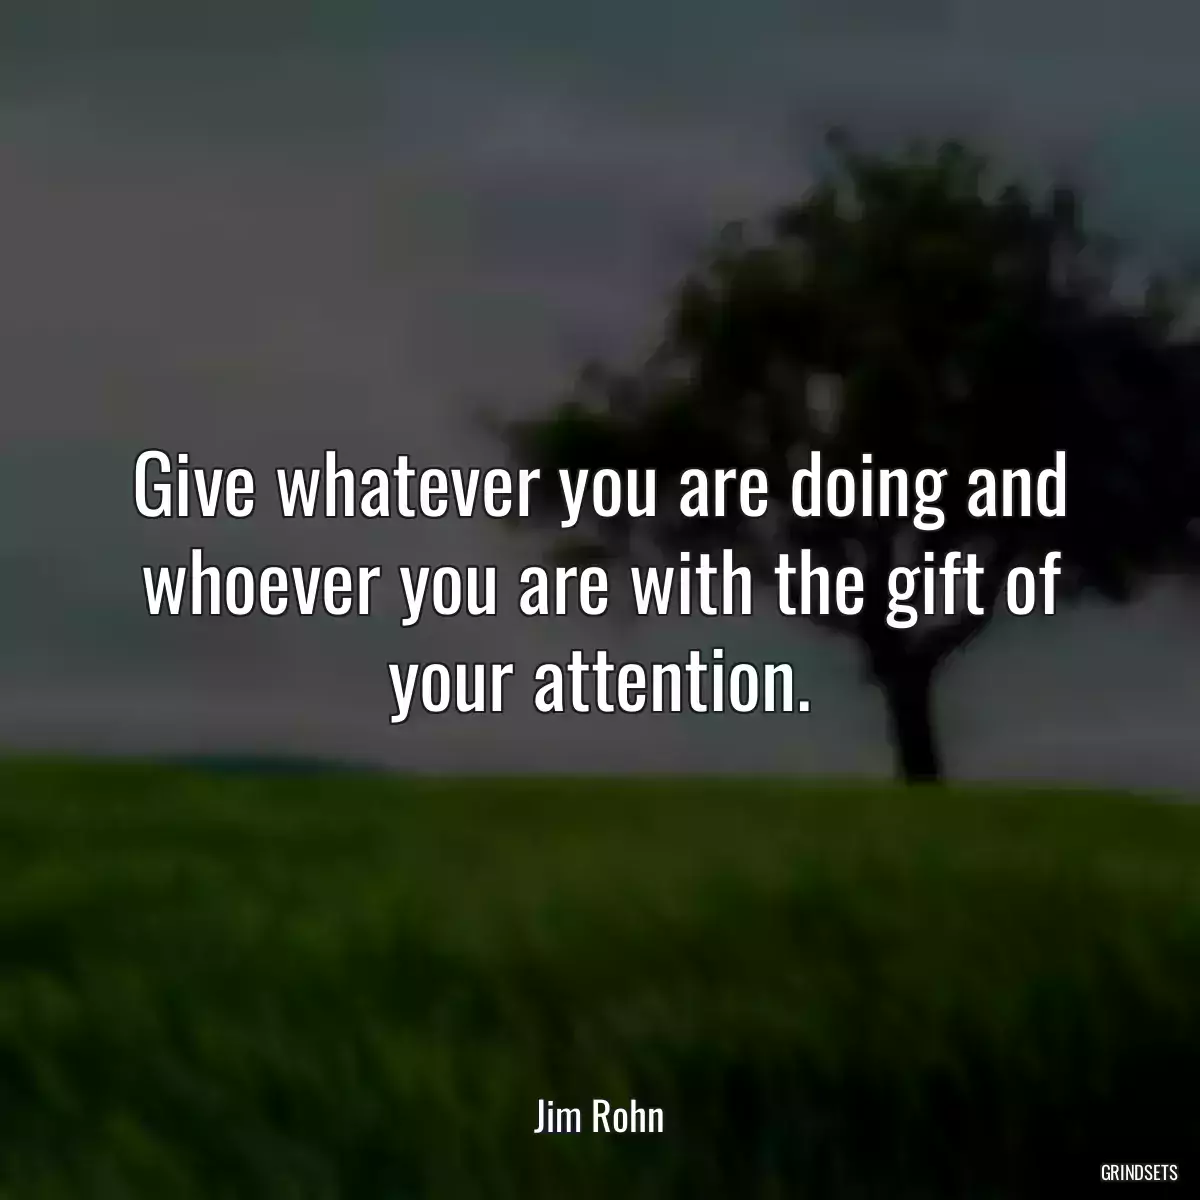 Give whatever you are doing and whoever you are with the gift of your attention.